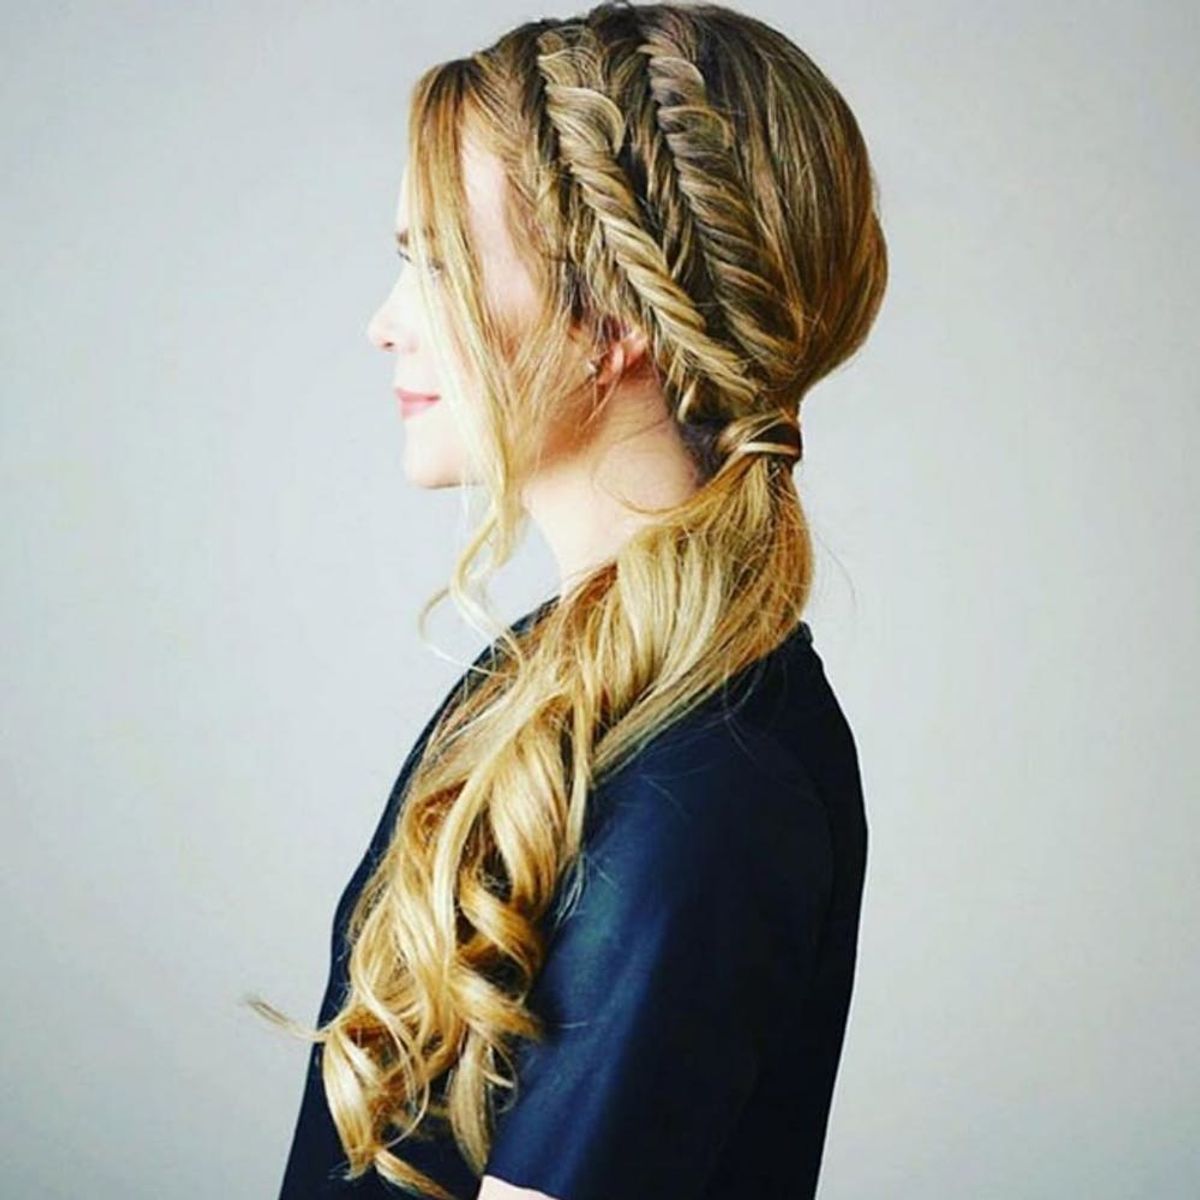 11 Twist Hairstyles to Switch Up Your Braid Game